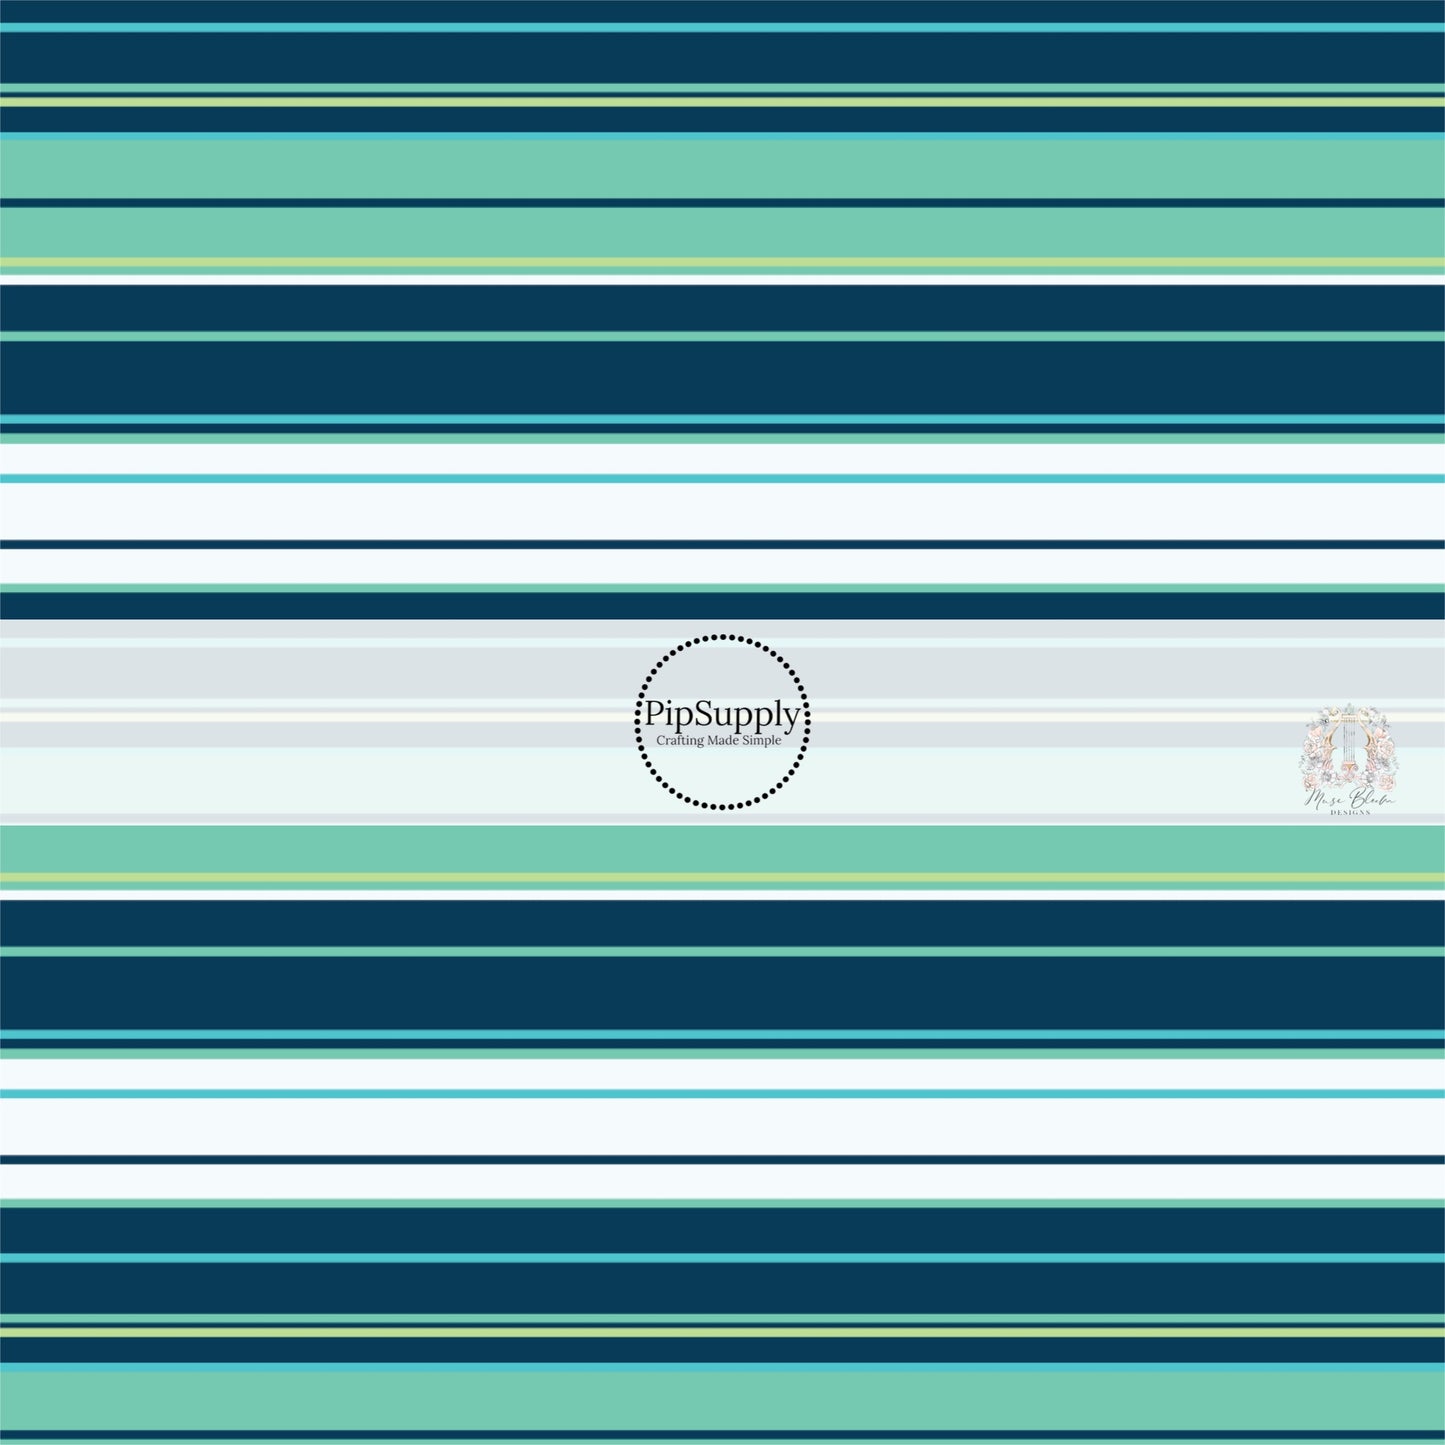 Tropical stripes in aqua, teal, light blue, light green, and dark navy fabric by the yard.